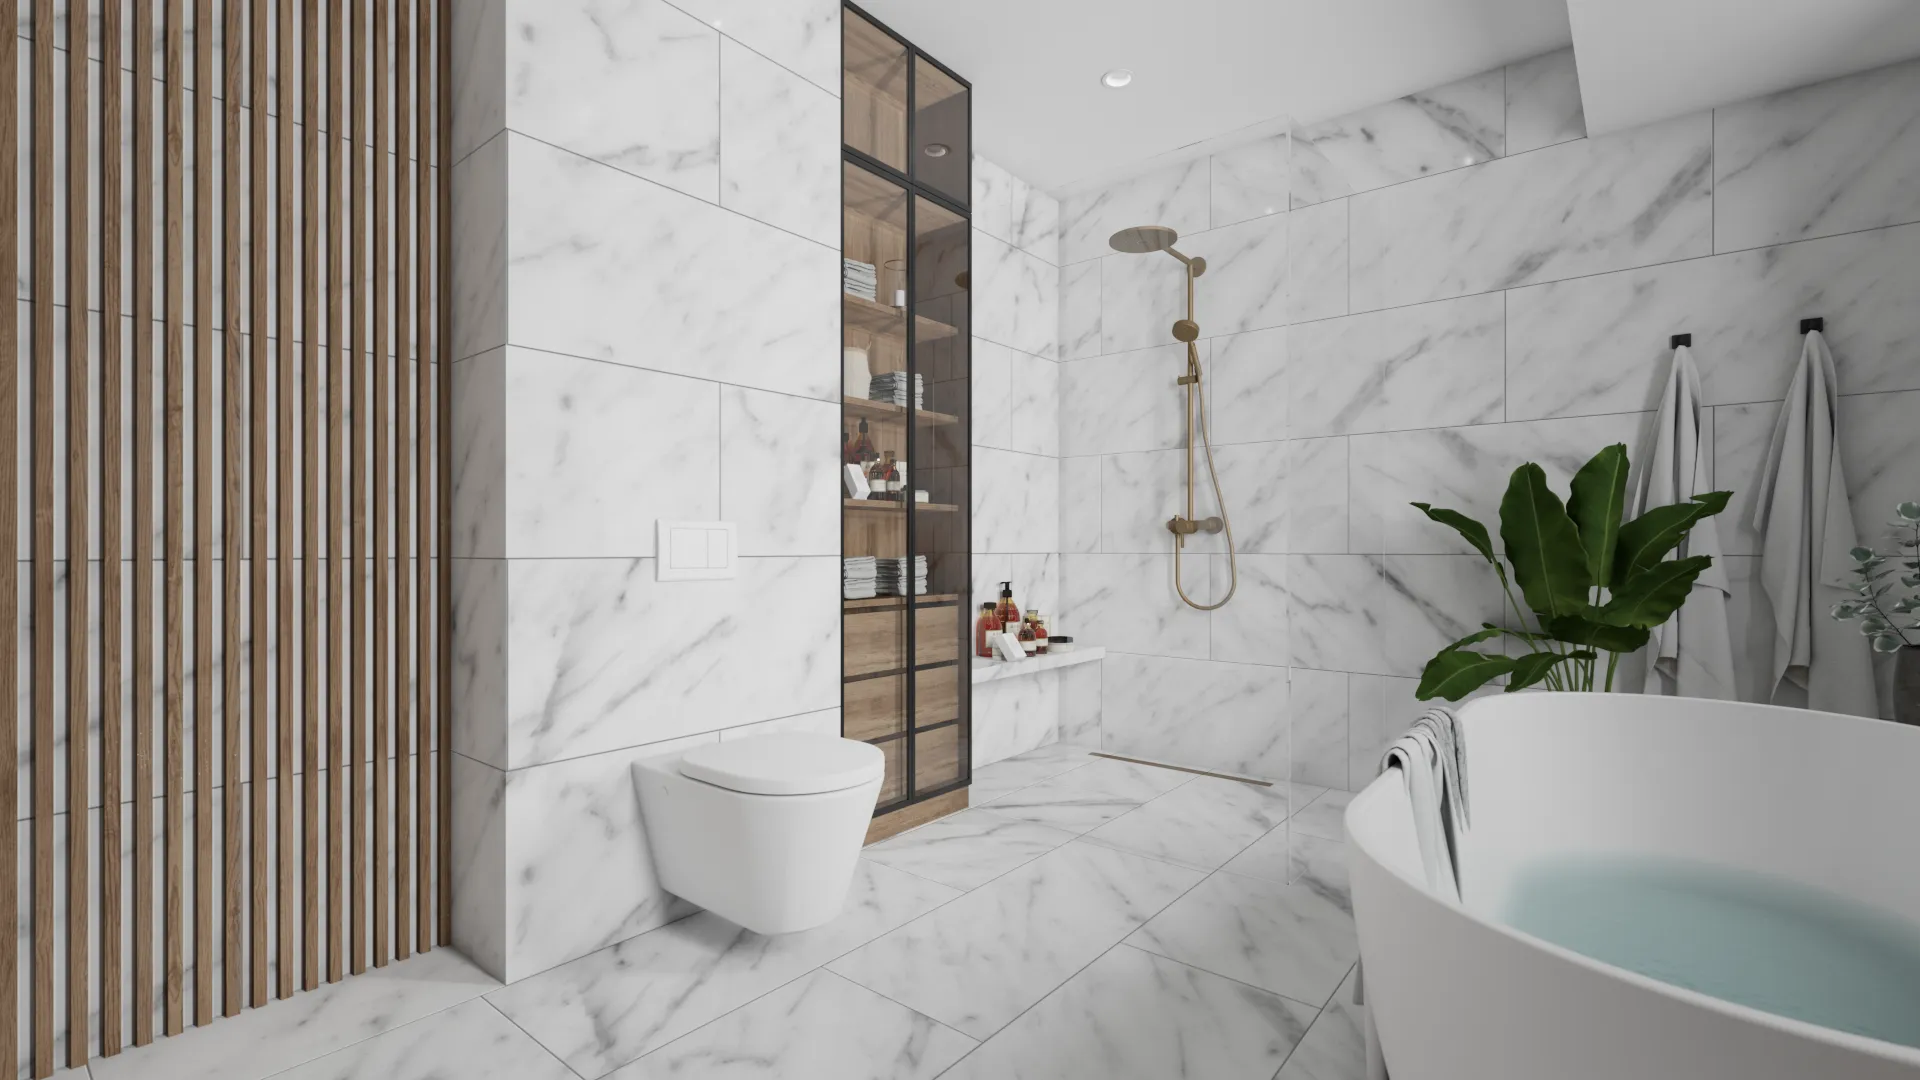 Luxurious bathroom with marble walls, wooden slats, and gold fixtures, exuding elegance and sophistication. Design by Debora, an online interior design service.